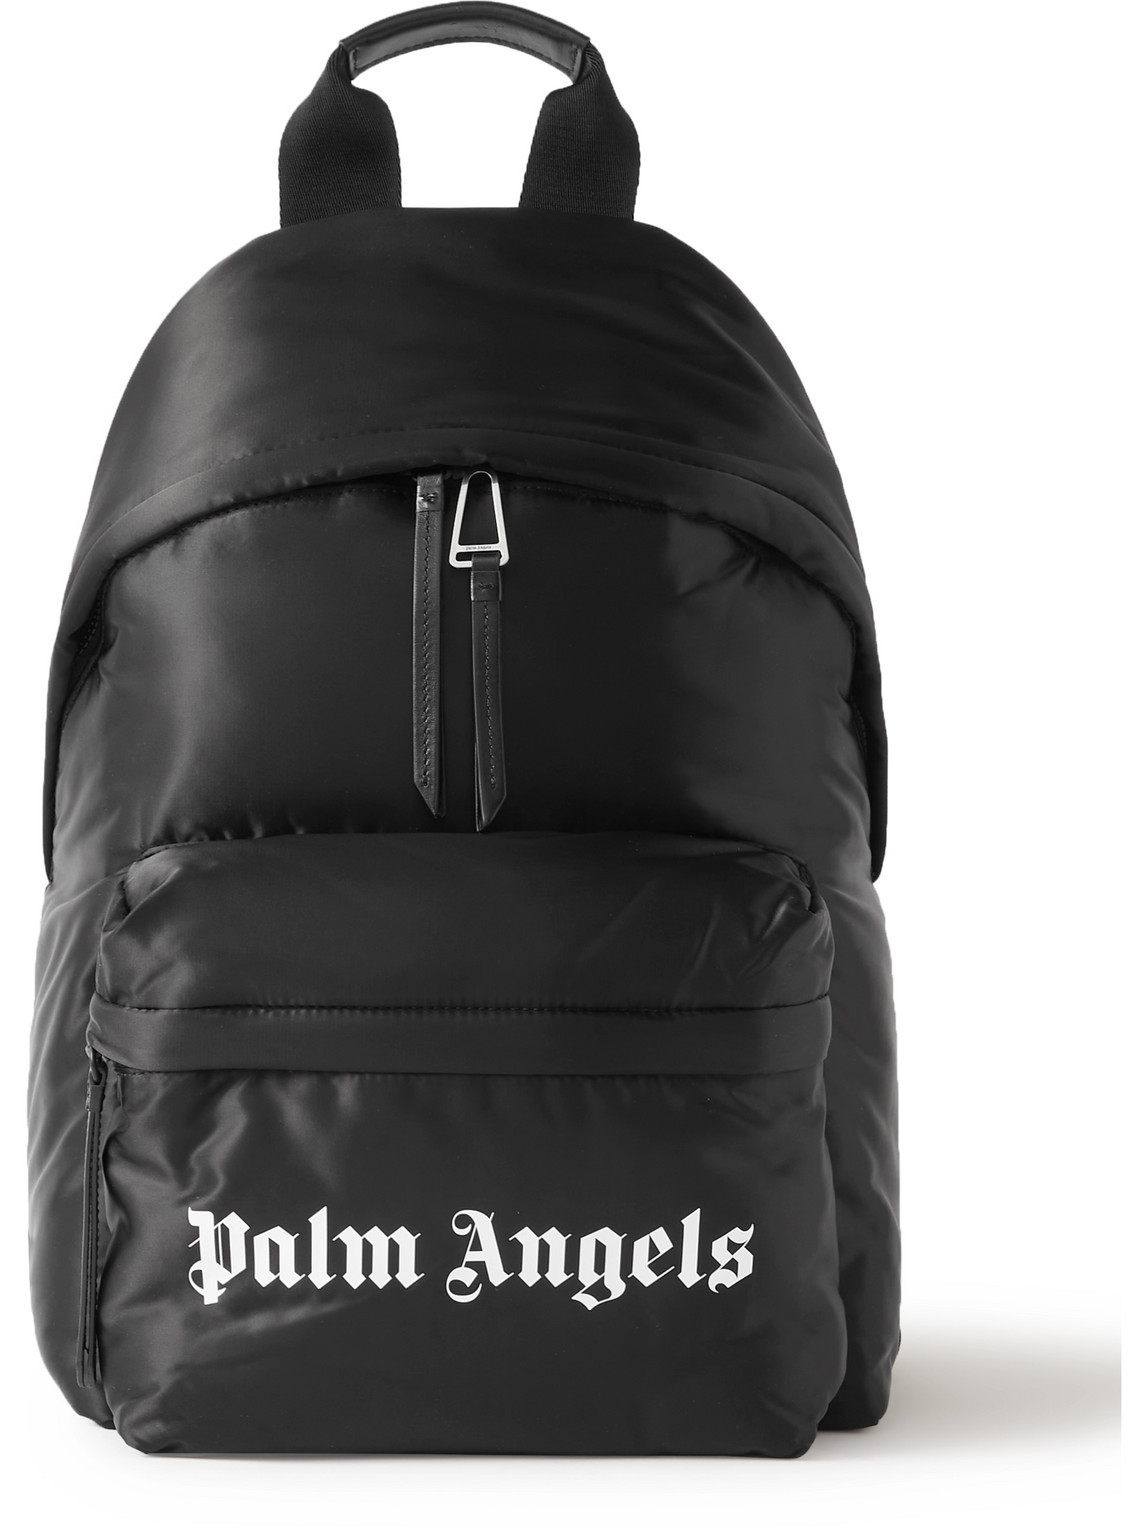 PALM ANGELS LOGO-PRINT LEATHER-TRIMMED SHELL BACKPACK